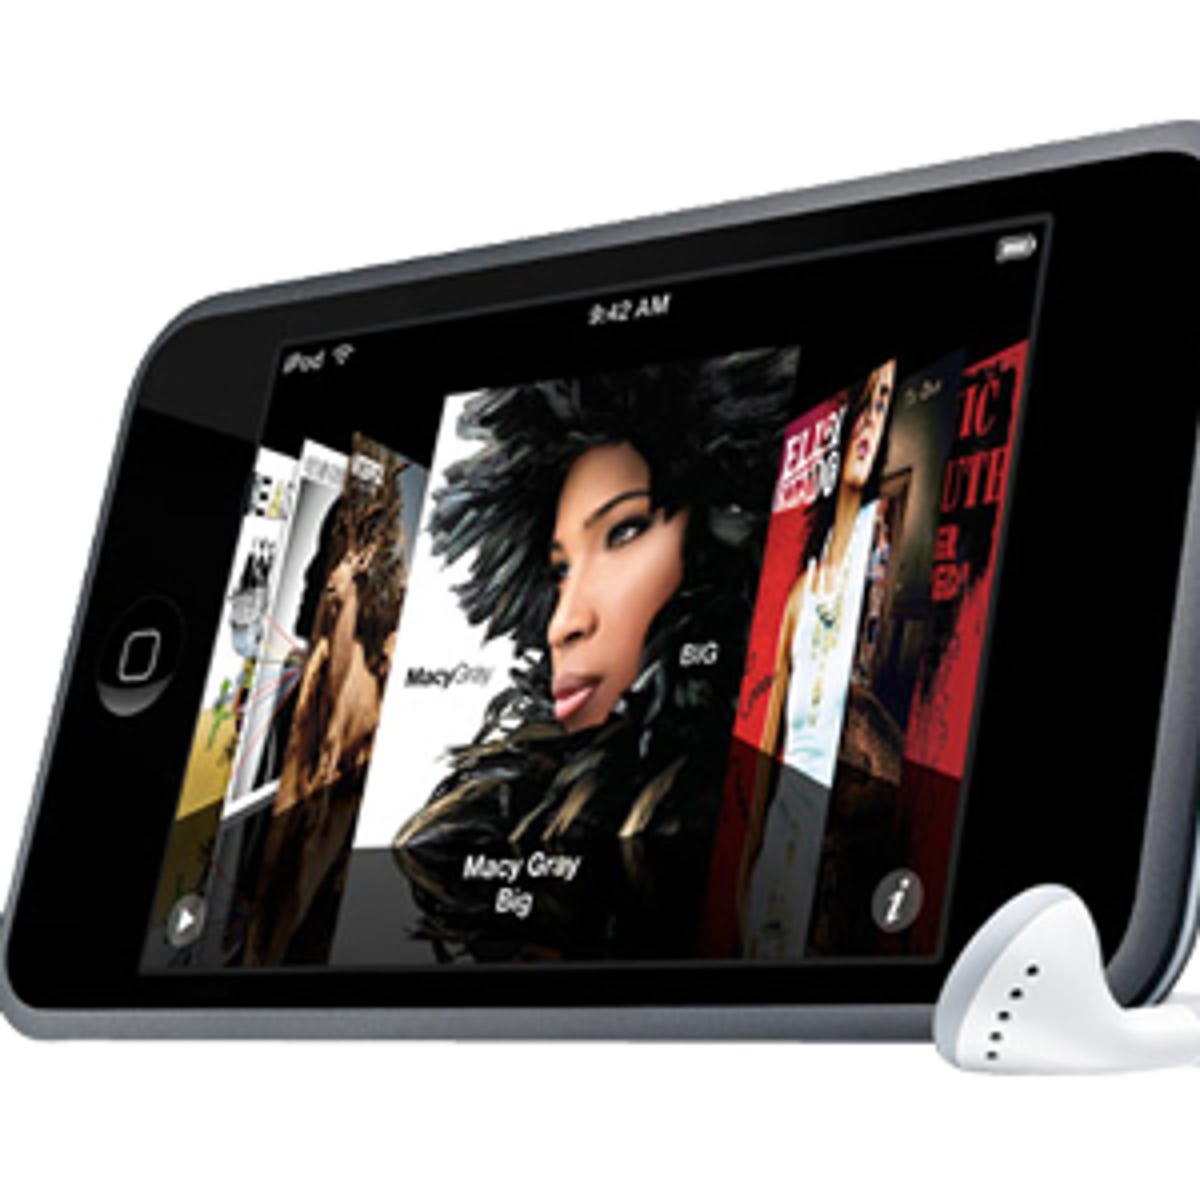 Apple iPod Touch review: iPod Touch -